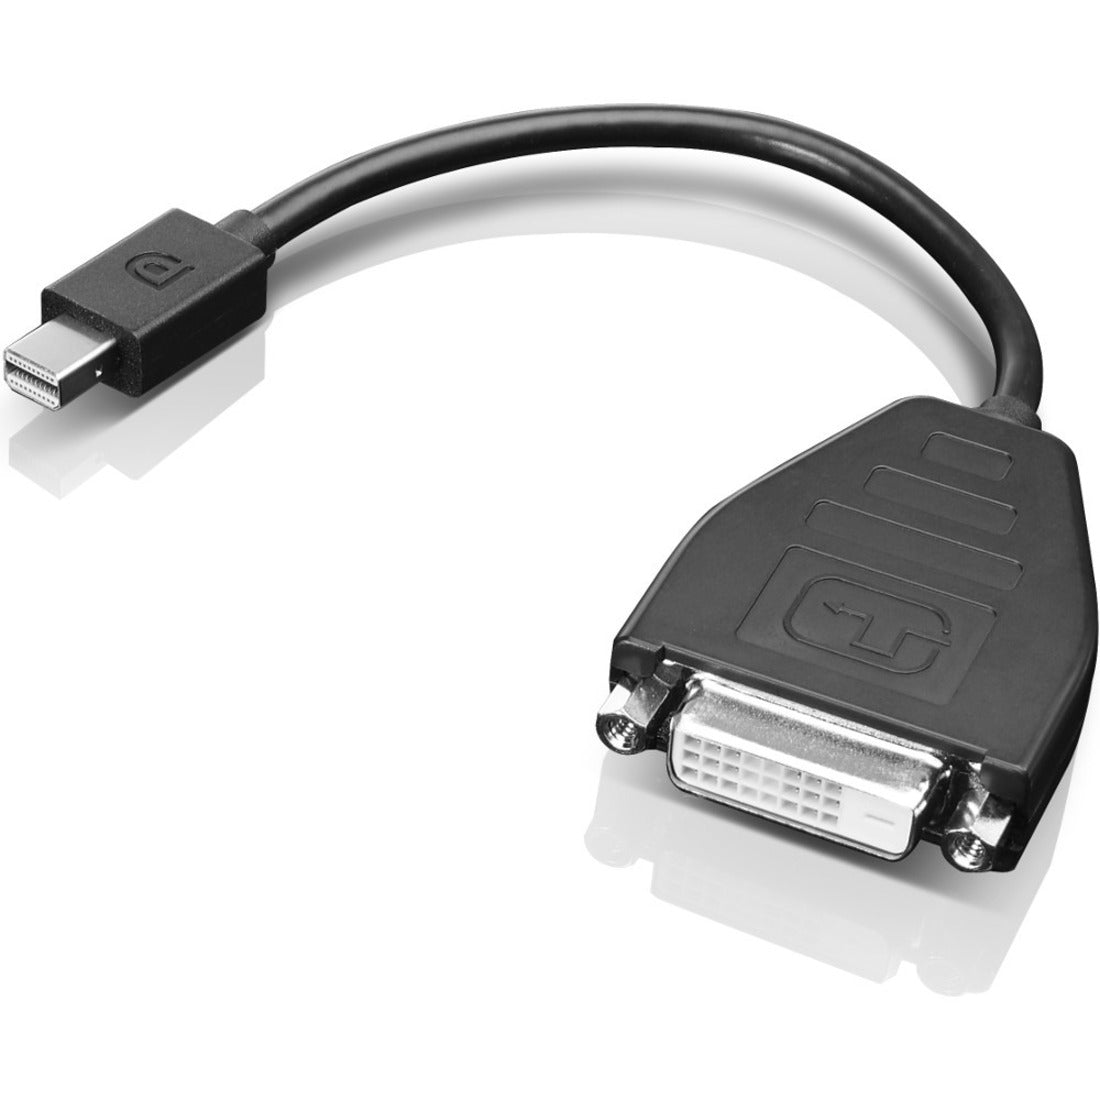 Lenovo 0B47090 Mini-DisplayPort to DVI-D Adapter Cable (Single Link), Connect Your Devices with Ease